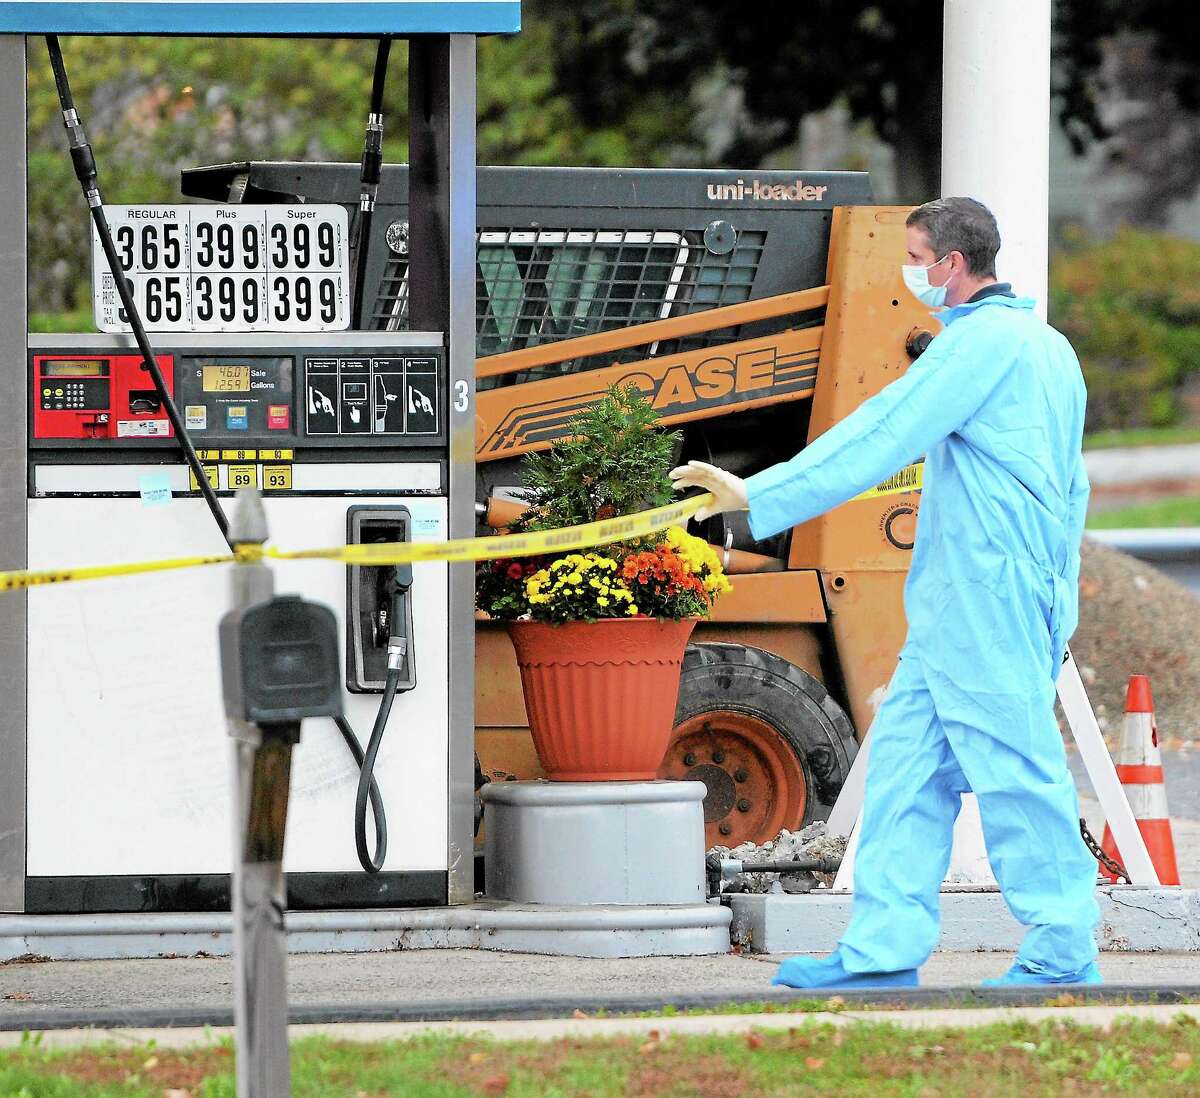 (Peter Hvizdak — Register) Connecticut State Police investigate the fatal shooting of a robbery suspect by a trooper Wednesday at Patriot Fuels gas station, 719 Boston Post Road, by West River Street, Milford. Matthew S. Lofaro, 28, died after being shot by Trooper 1st Class James Scott. The incident is under investigation.